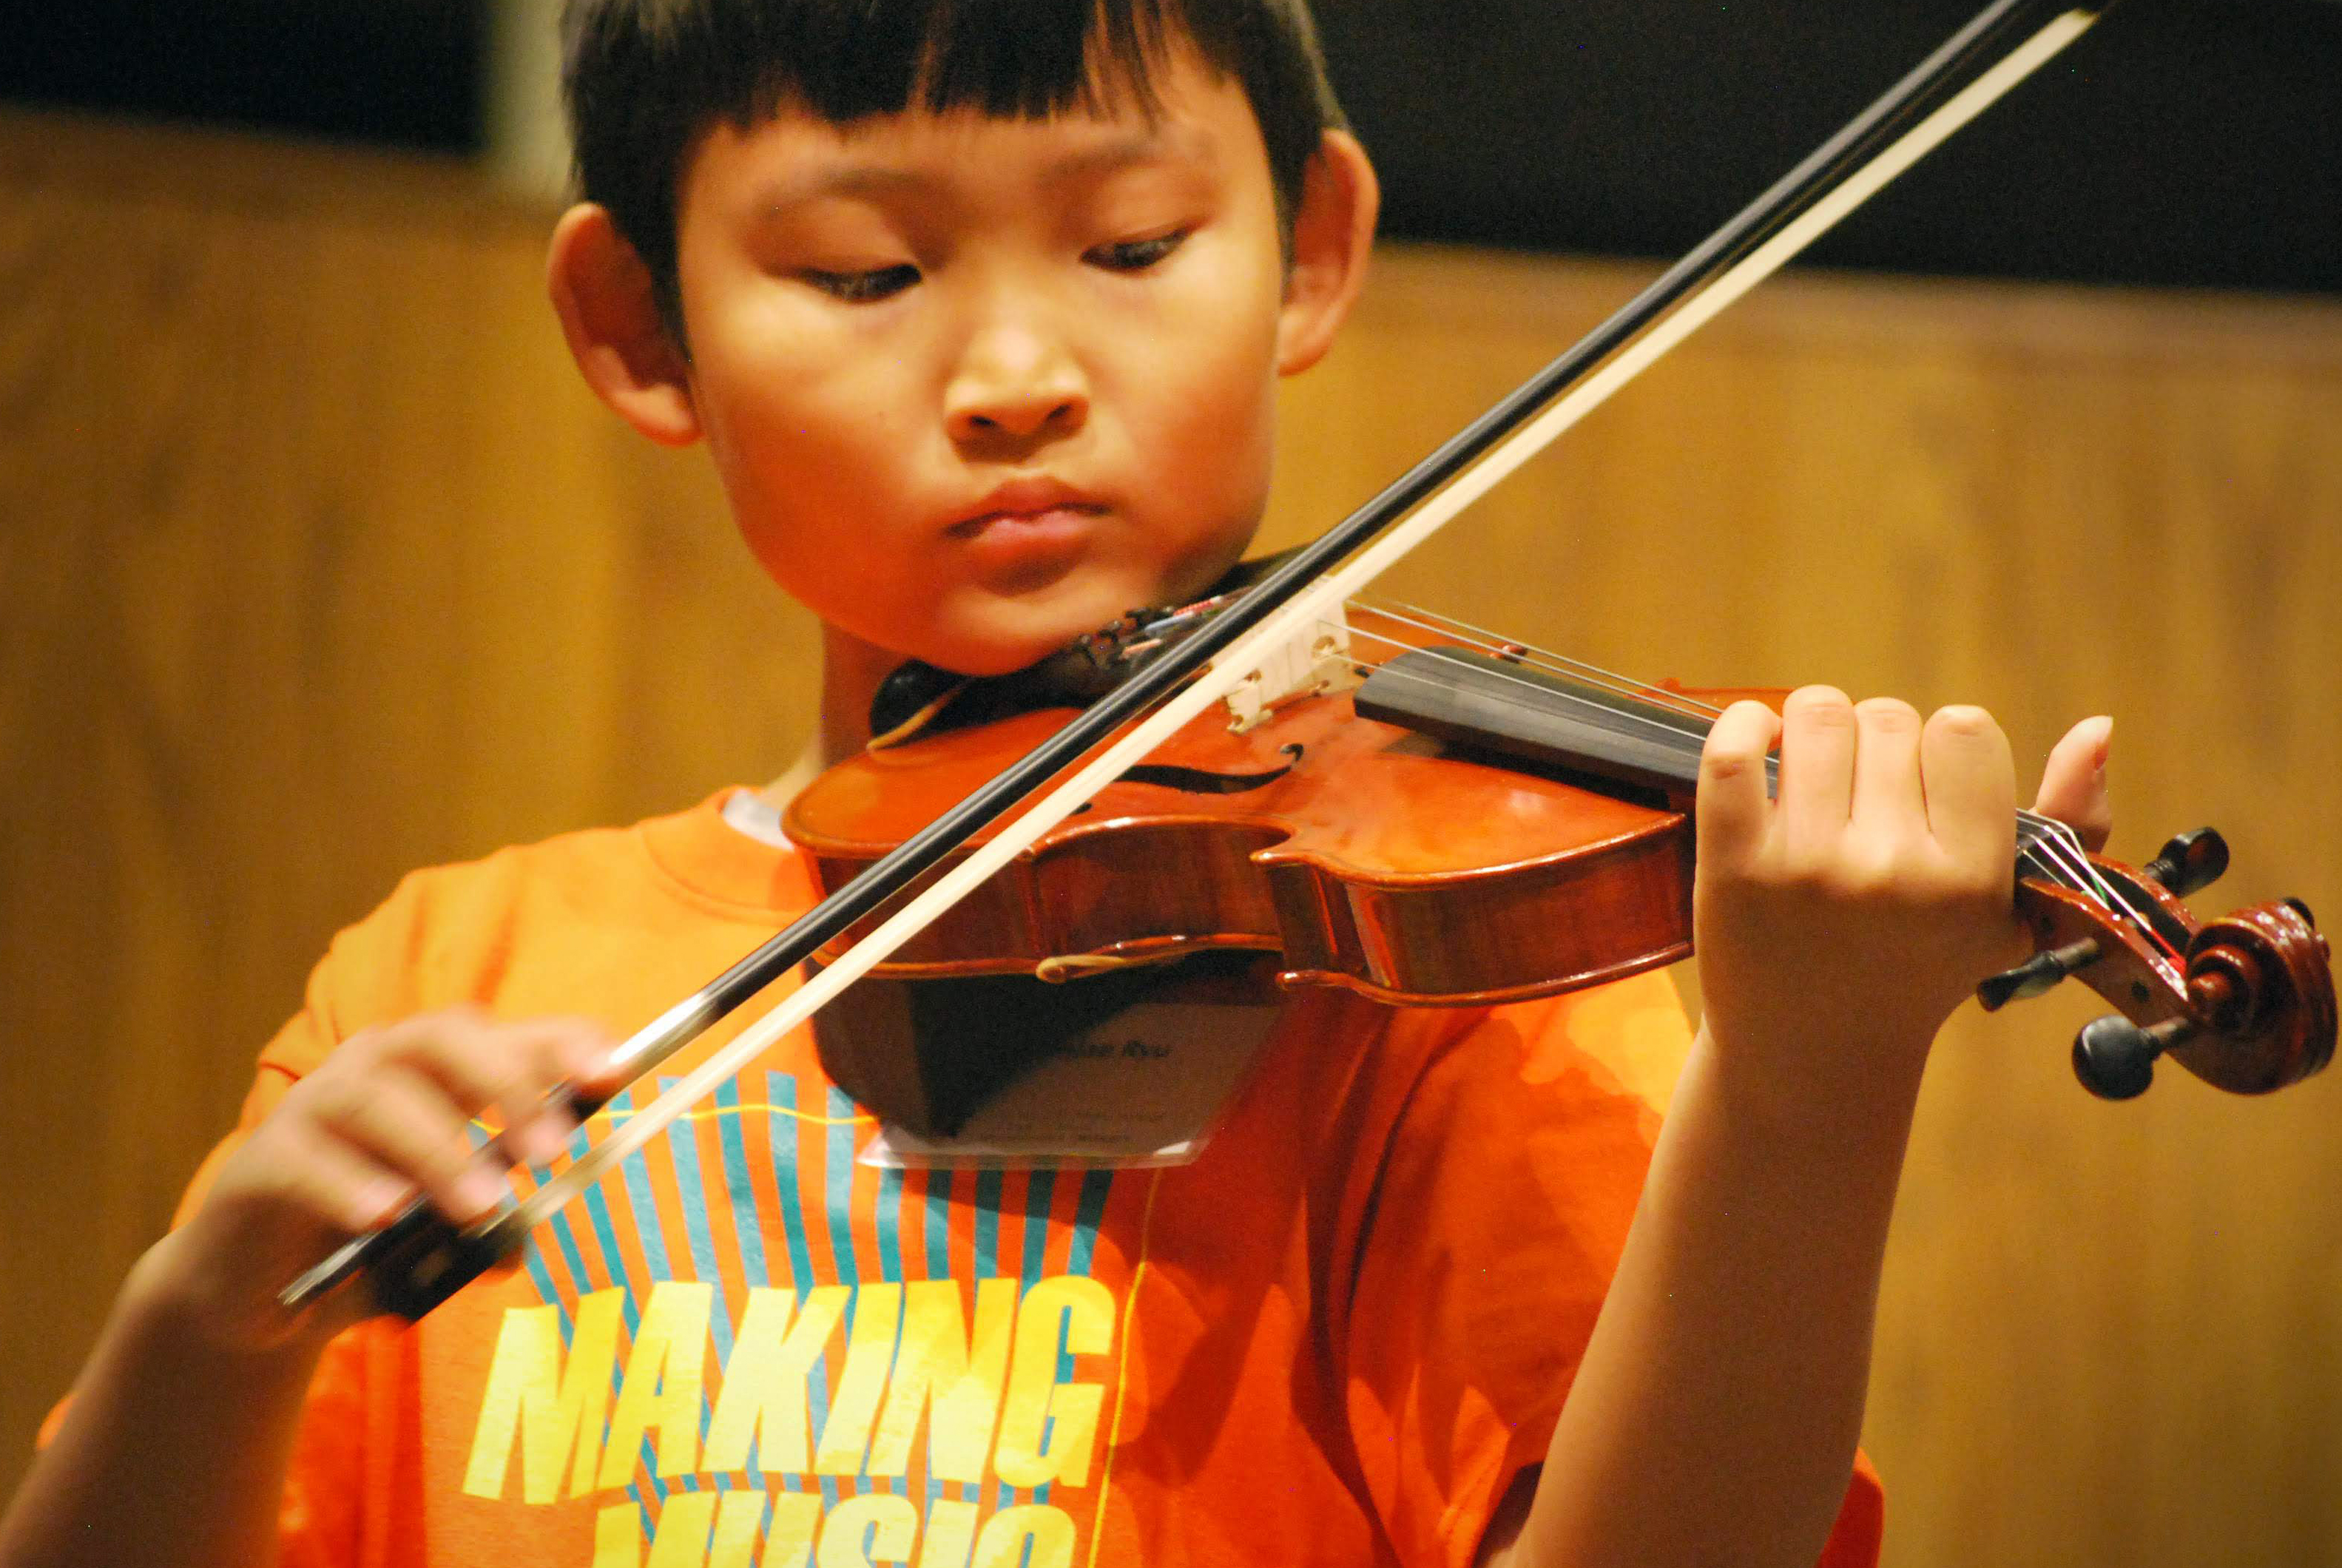 Record Number of Youth Making Music at Strings Camp